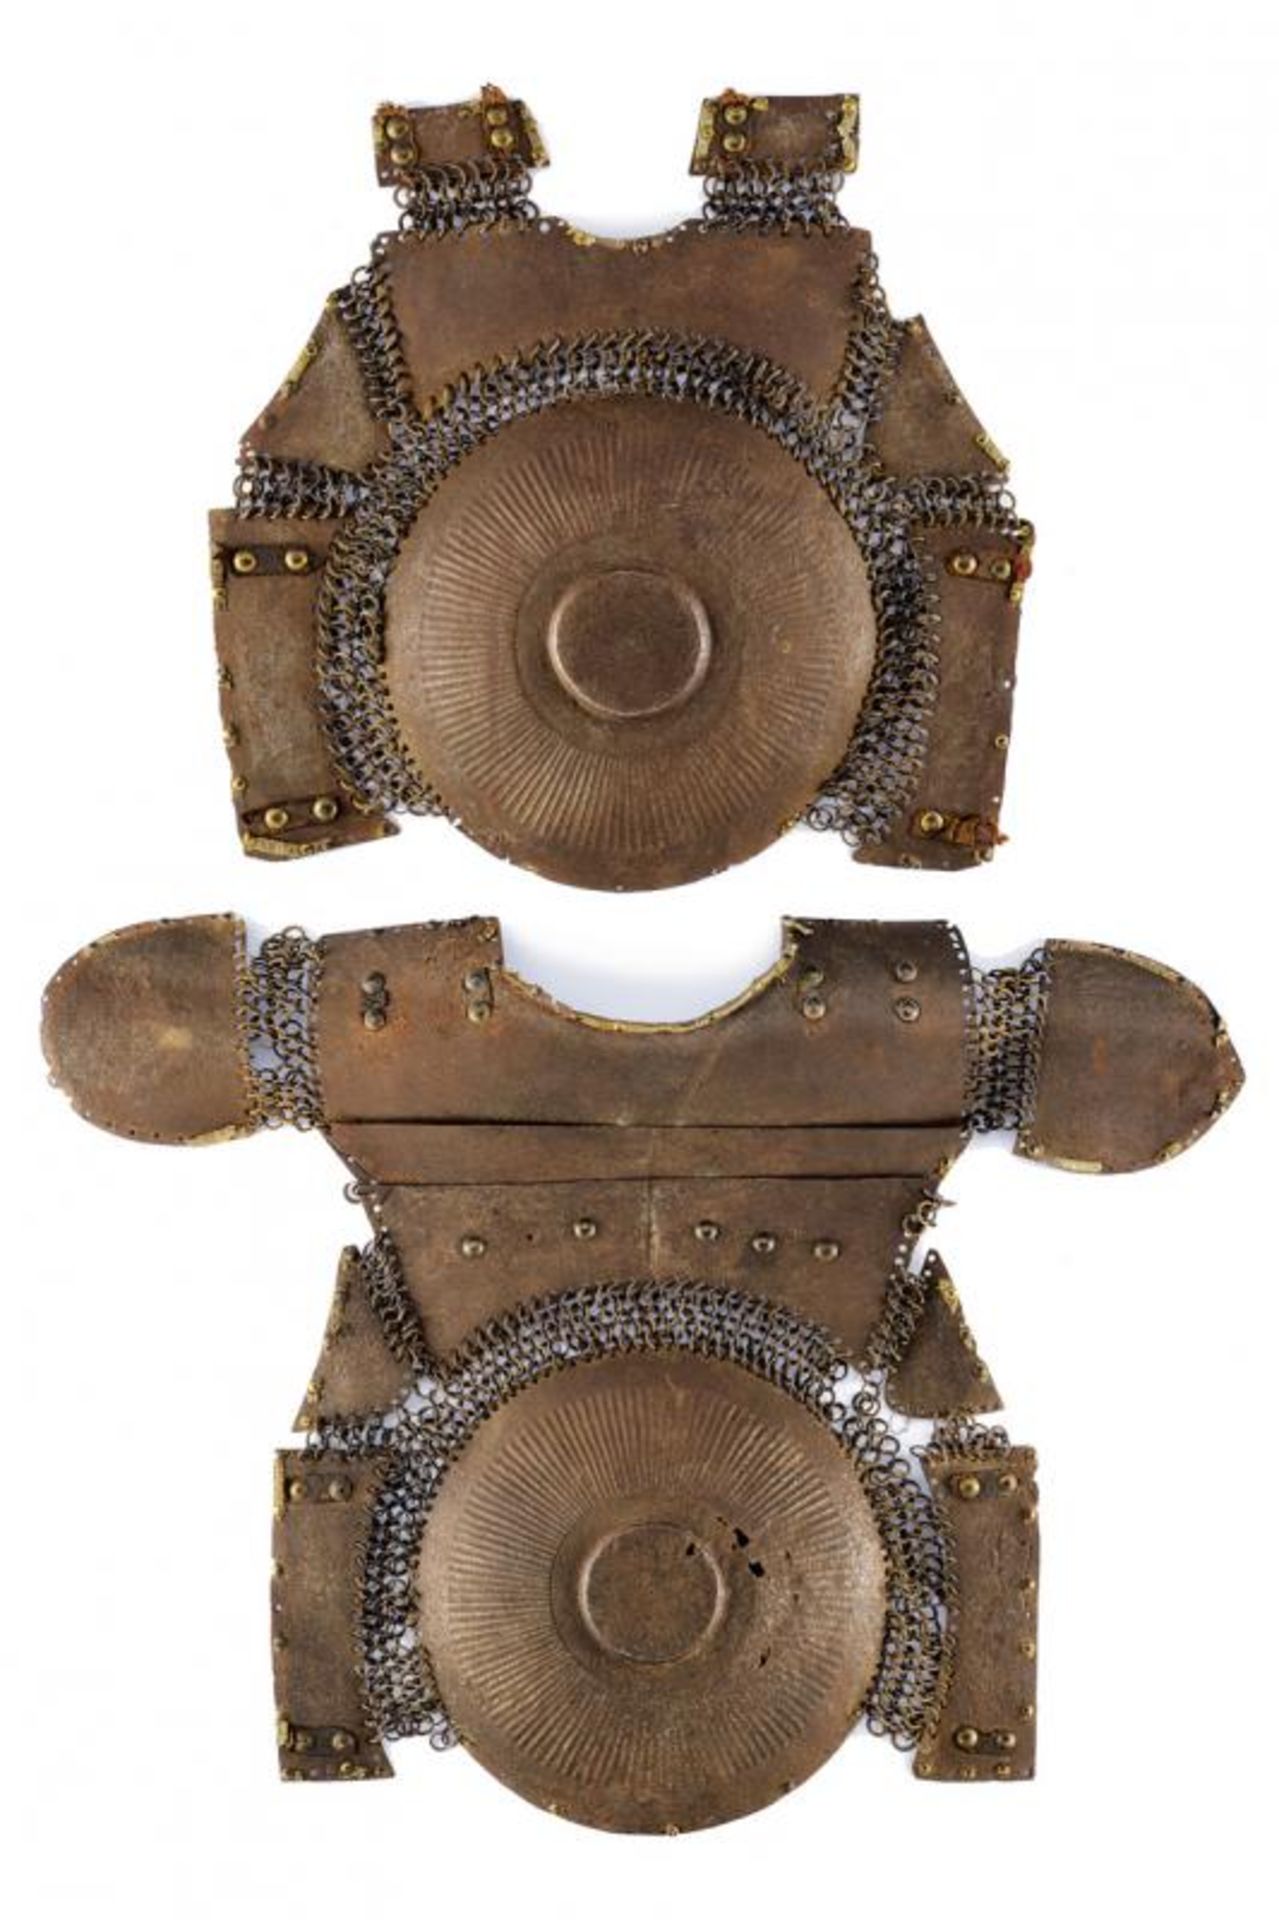 A krug (breast and backplate)